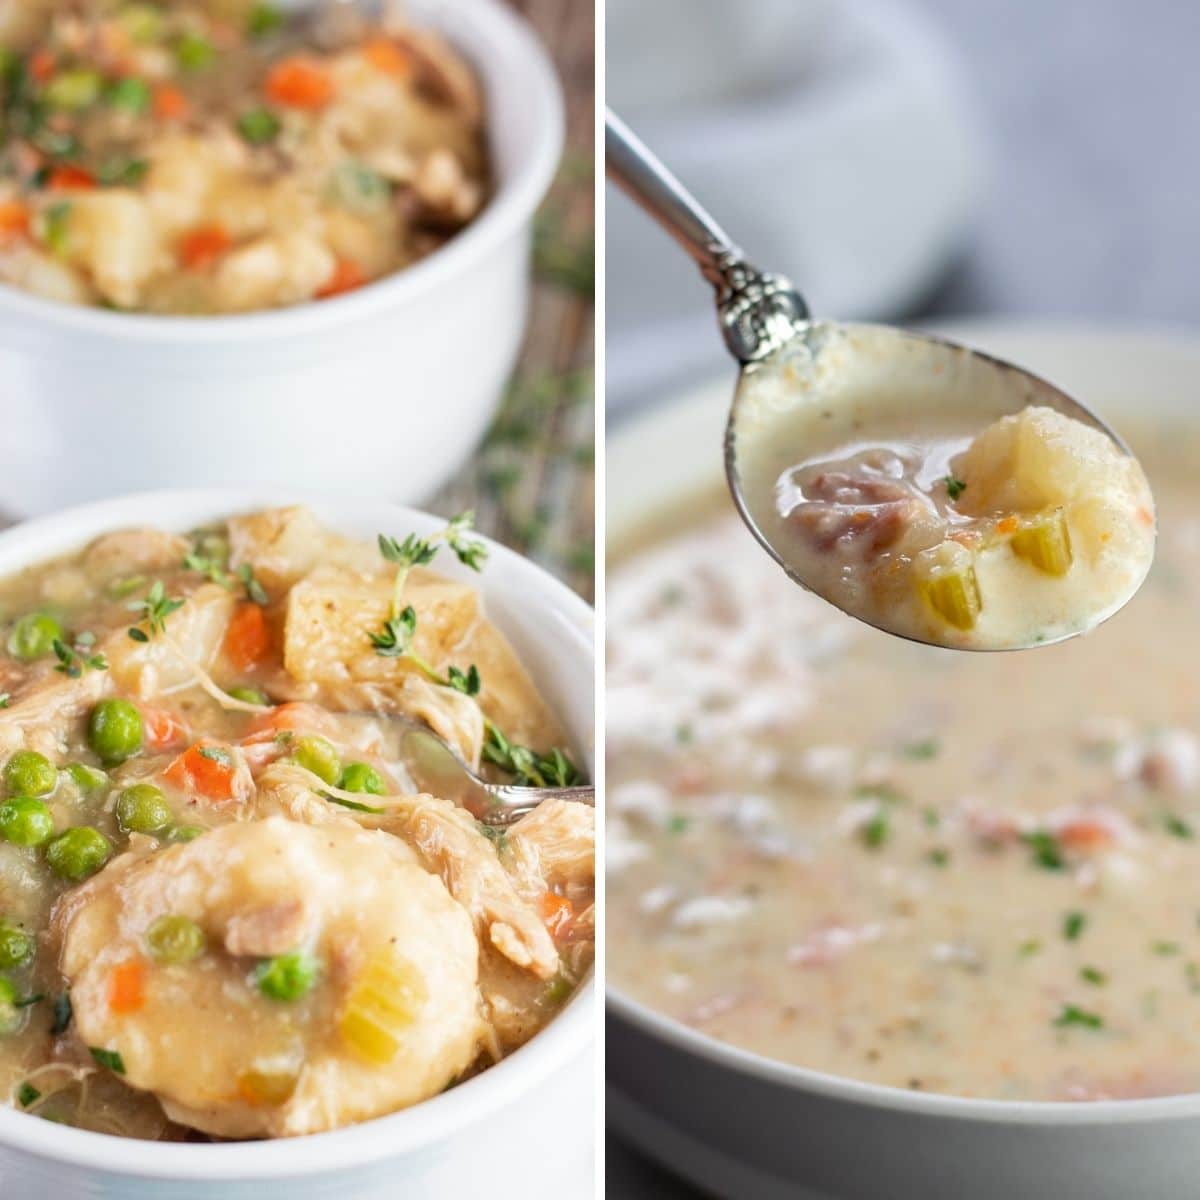 Best crockpot soup recipes with 2 image collage photo of soups served in white bowls.